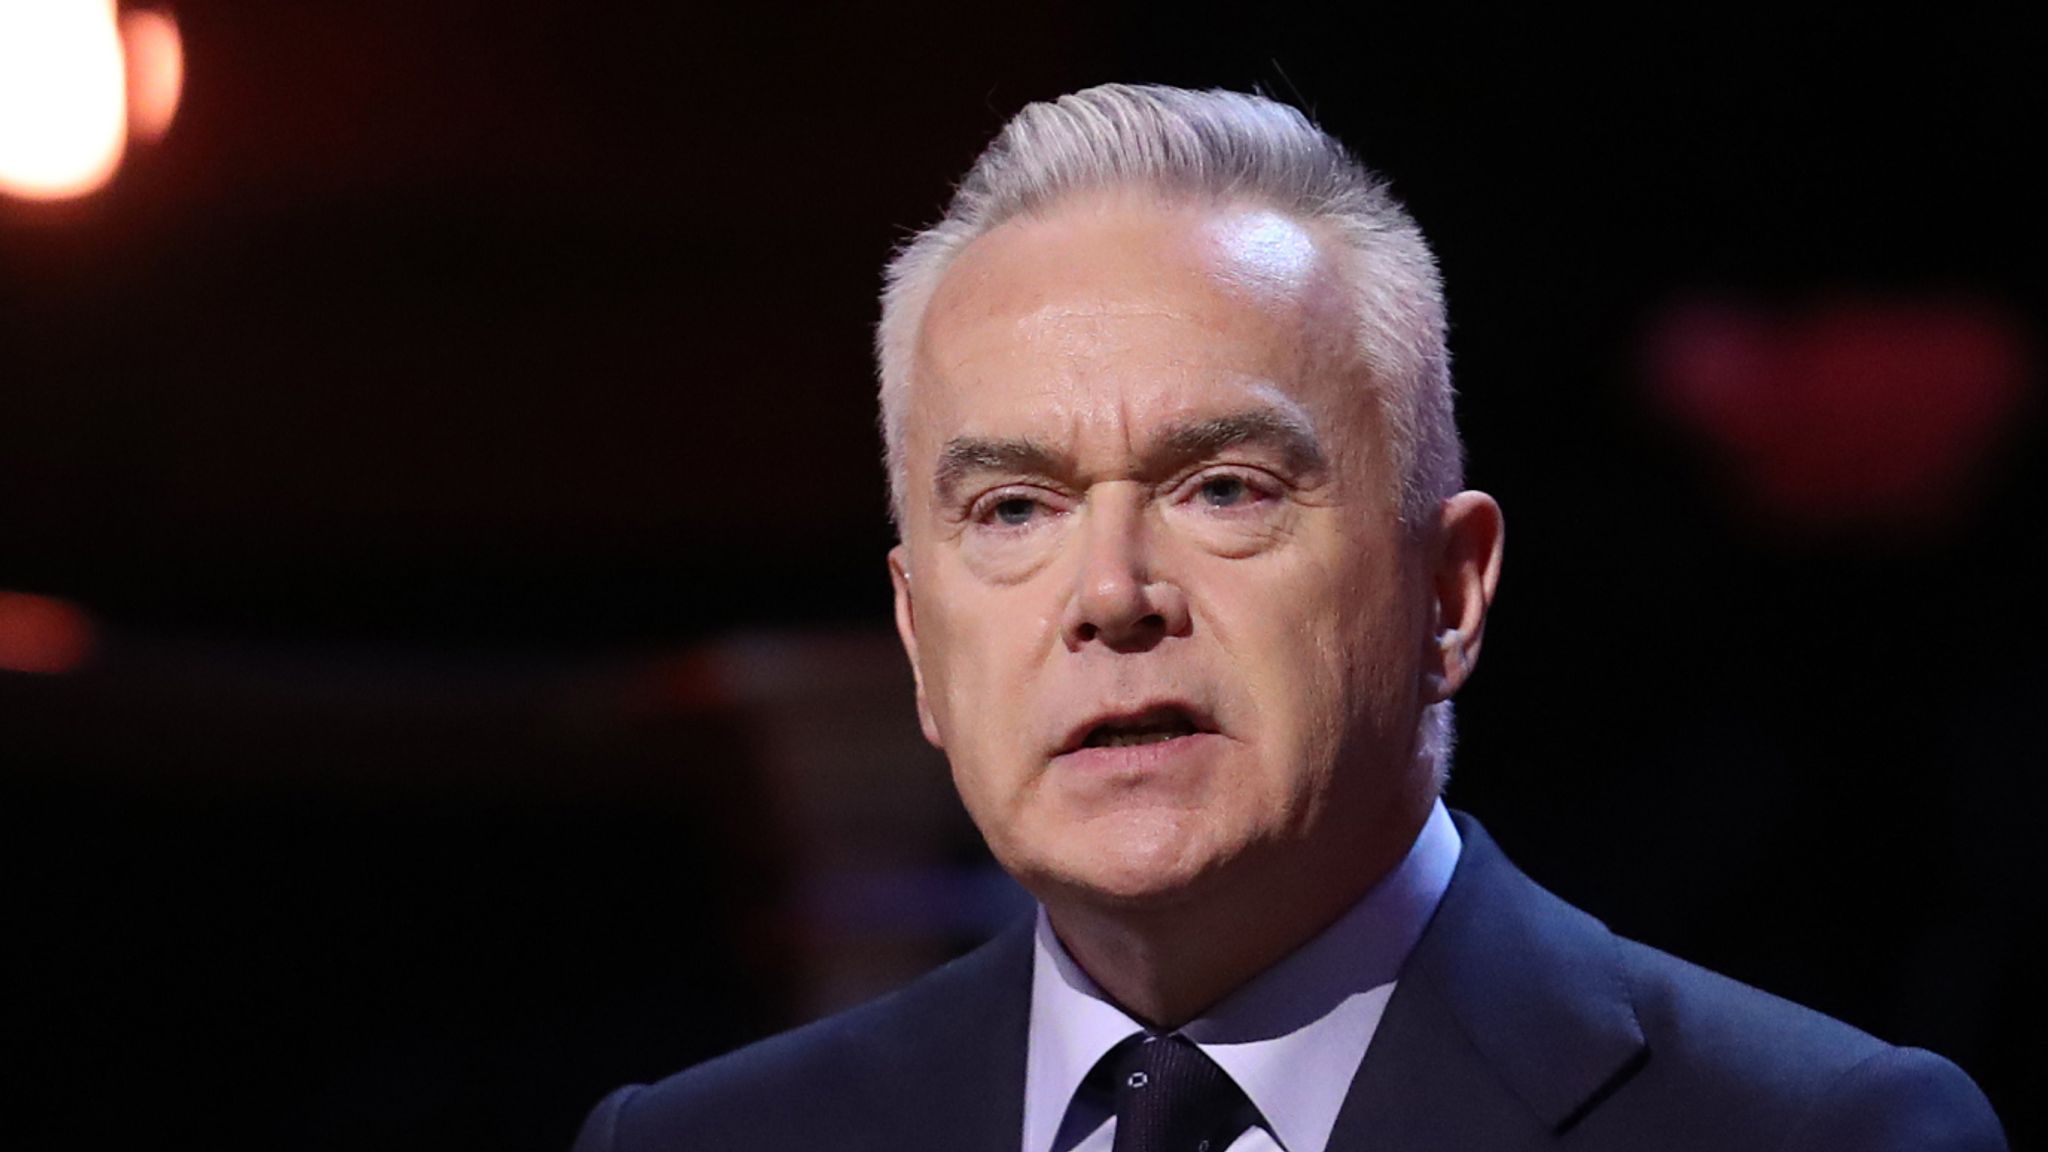 Huw Edwards named by his wife as BBC presenter accused of paying teen for explicit pictures UK News Sky News image pic